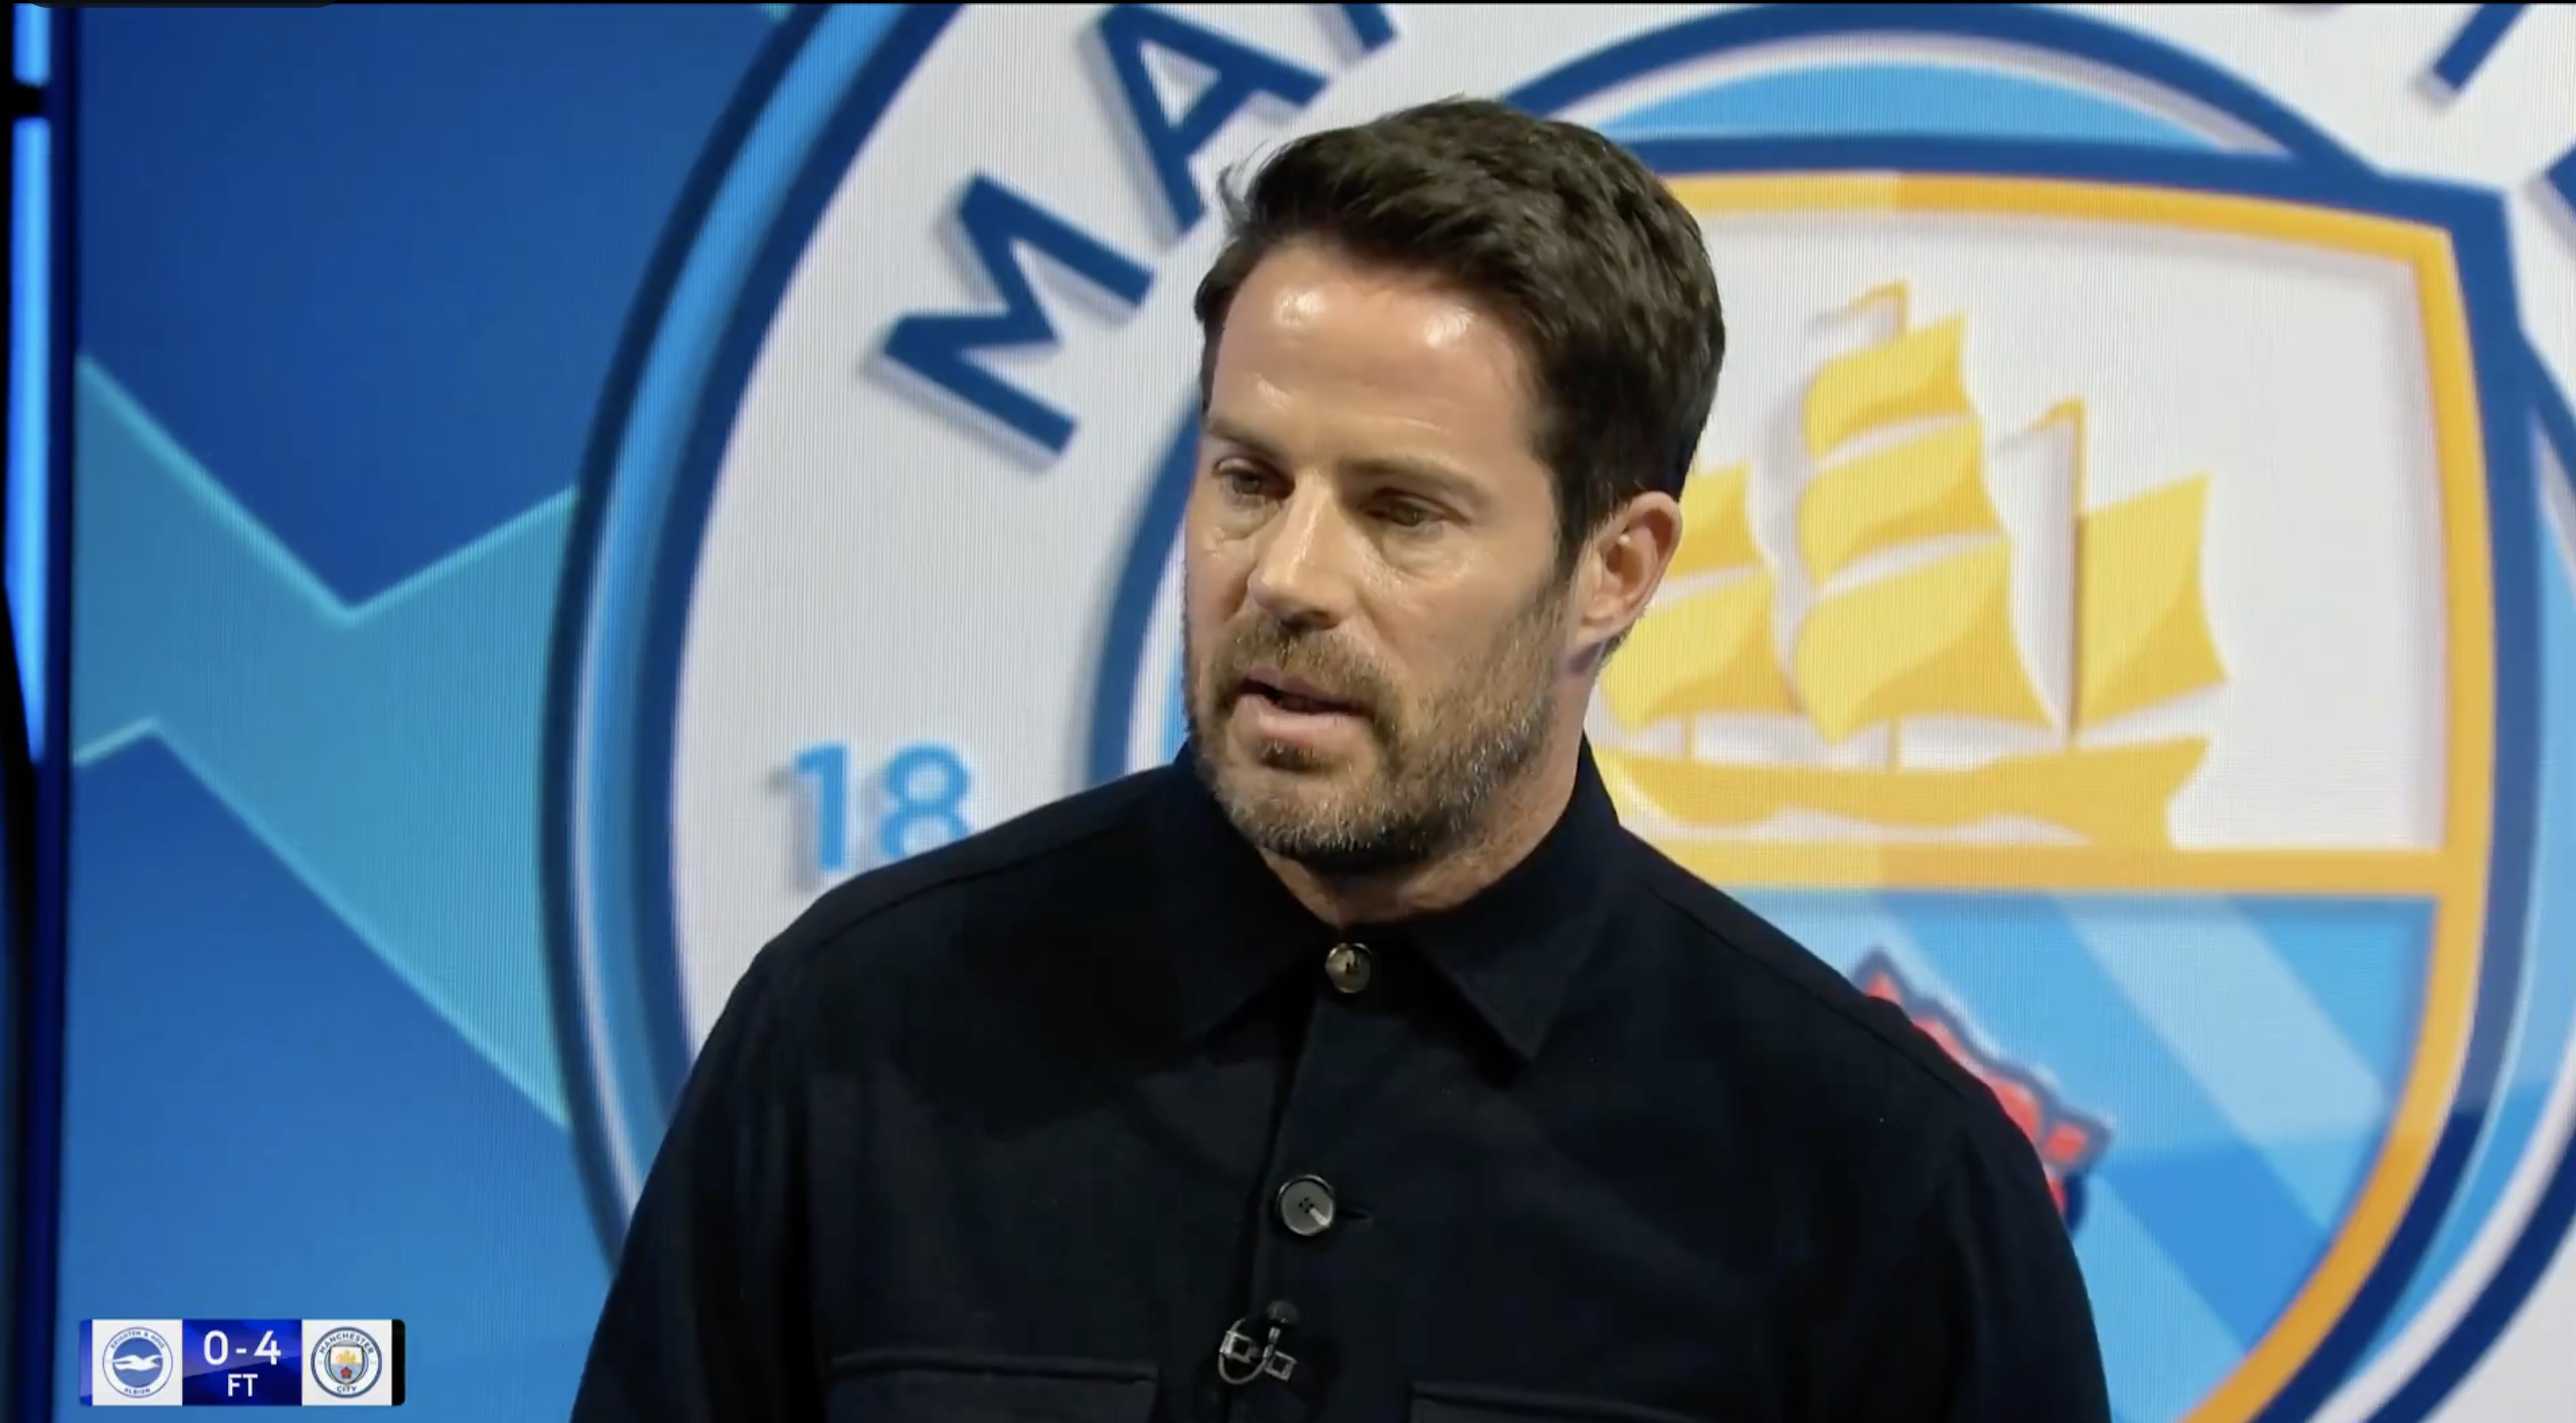 (Video) – Jamie Redknapp praises “elusive” performance of Kevin De Bruyne and Phil Foden